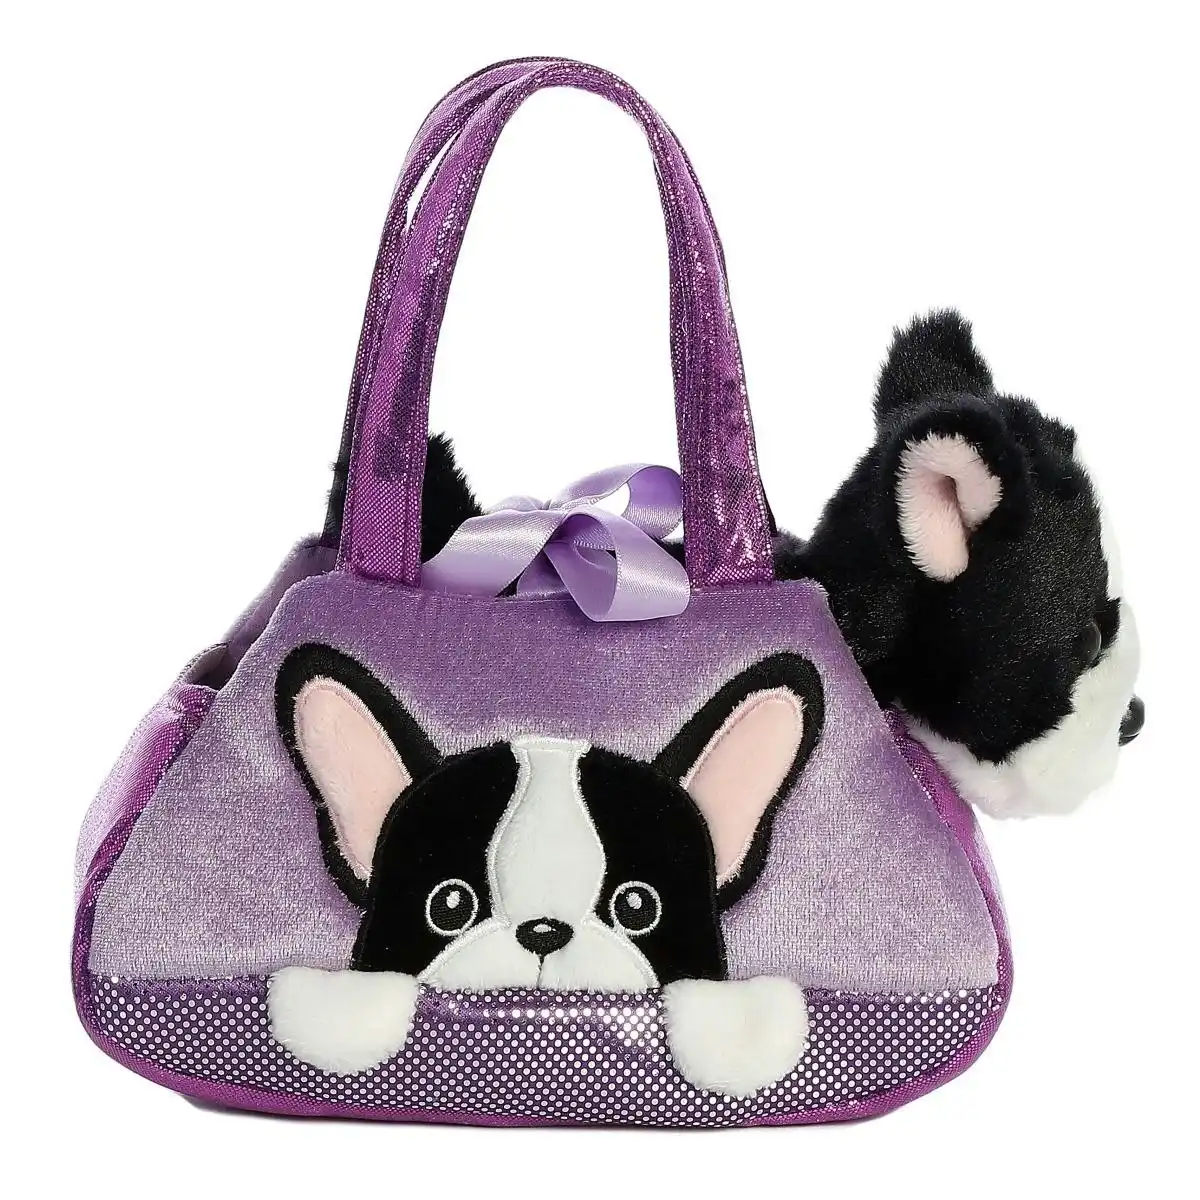 Cotton Candy -  Fancy Pals French Bulldog In Purple Bag